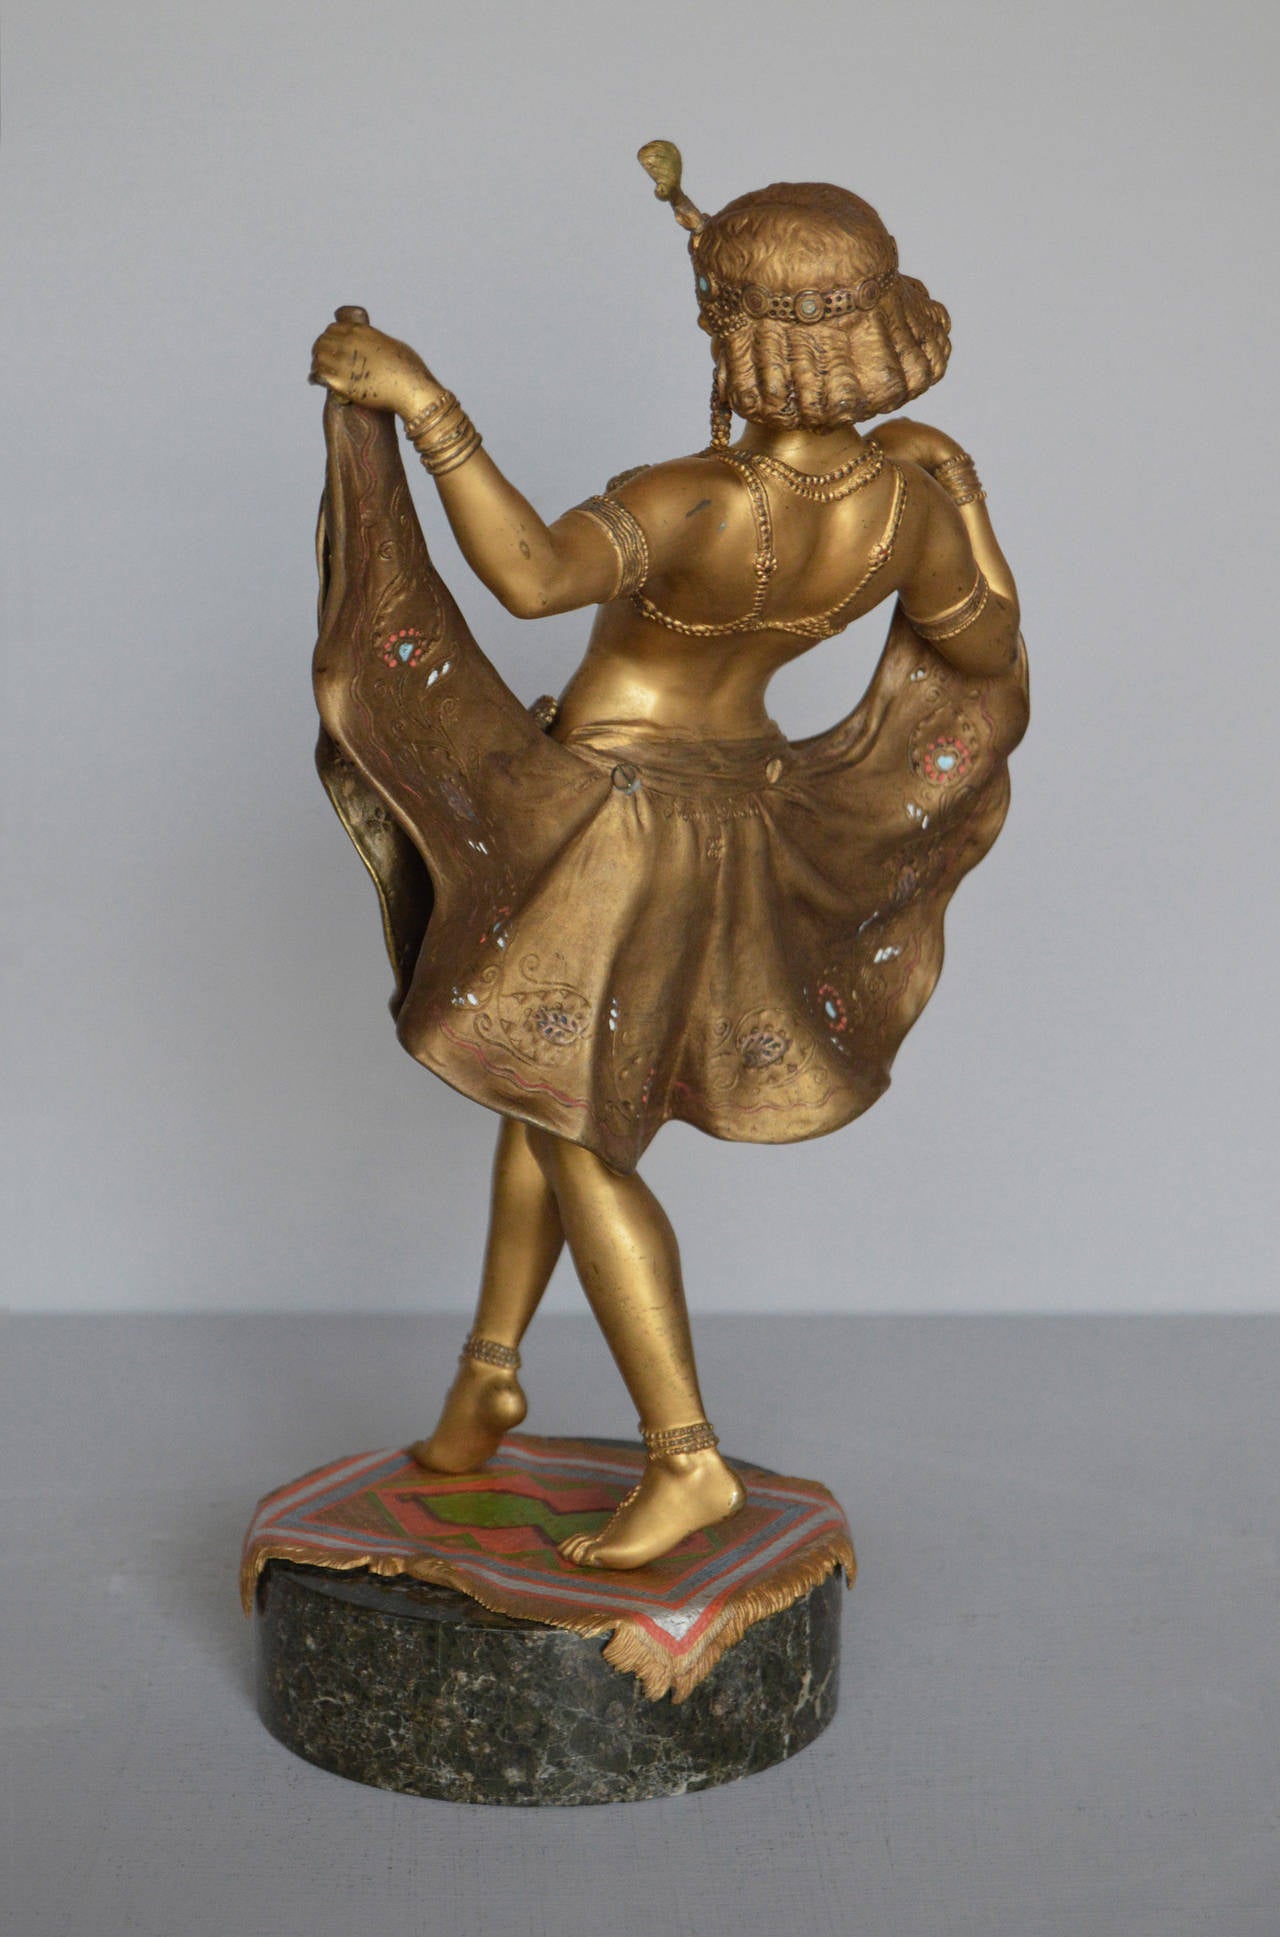 Franz Xavier Bergman
Austrian (1861-1936)
Bronze, signed ‘Nam Greb’ & ‘B’ in a vase.
Height: 13½ inches 
Width: 7¾ inches

Rare, large sized version of ‘Windy Day’, an erotic bronze figure of a young dancer, with fine cold painted decoration